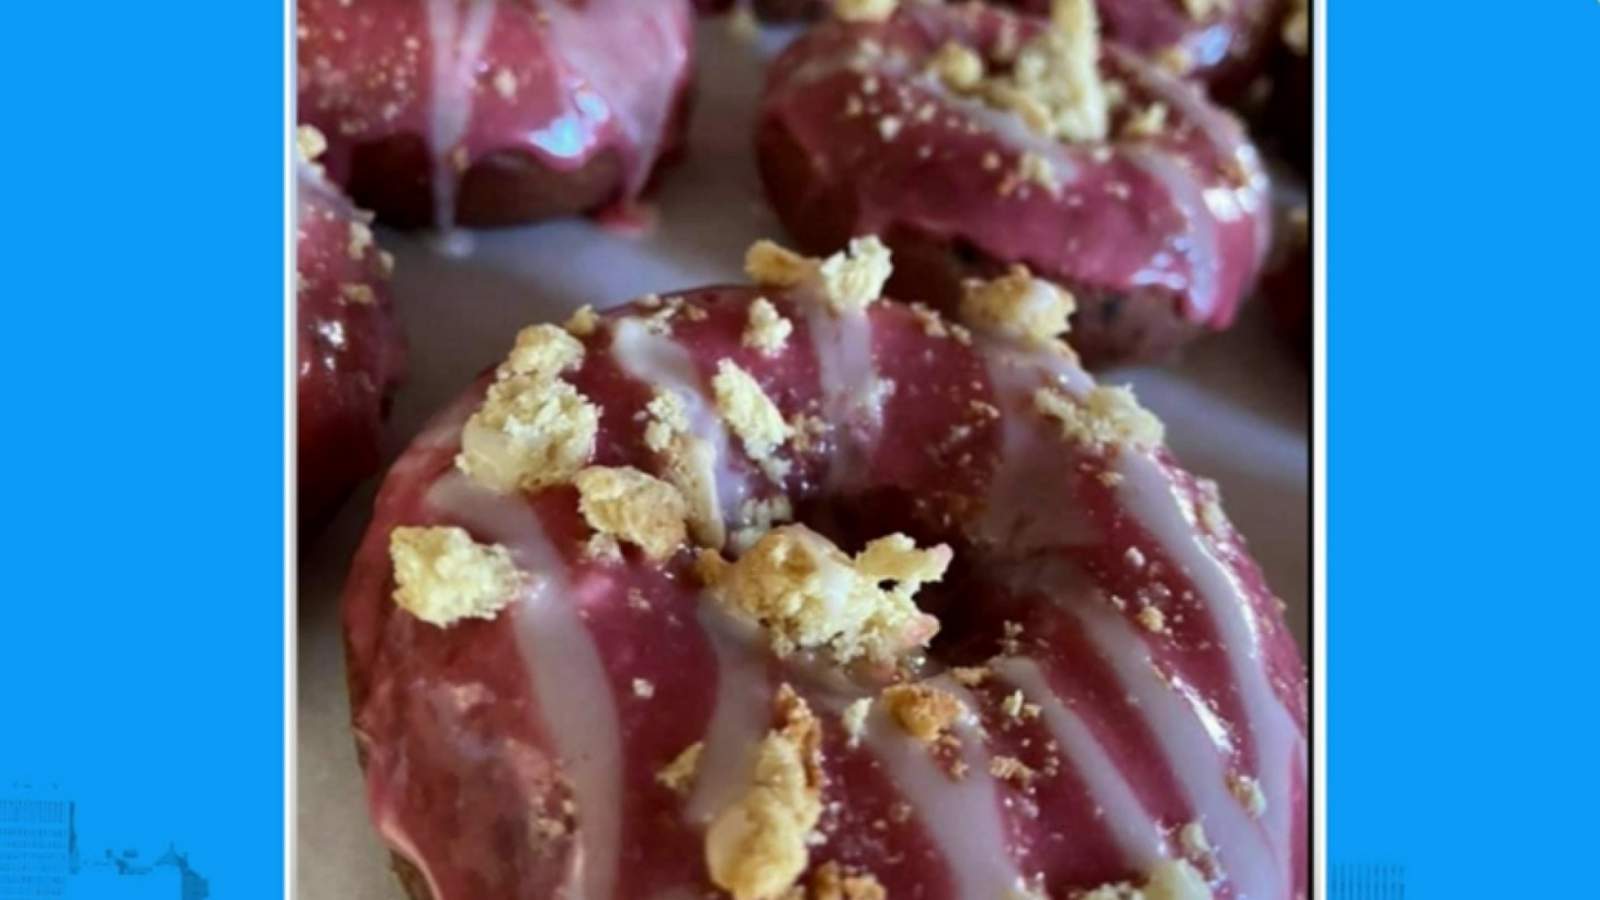 Donuts and hot cocoa bombs are sure to make your sweet tooth smile